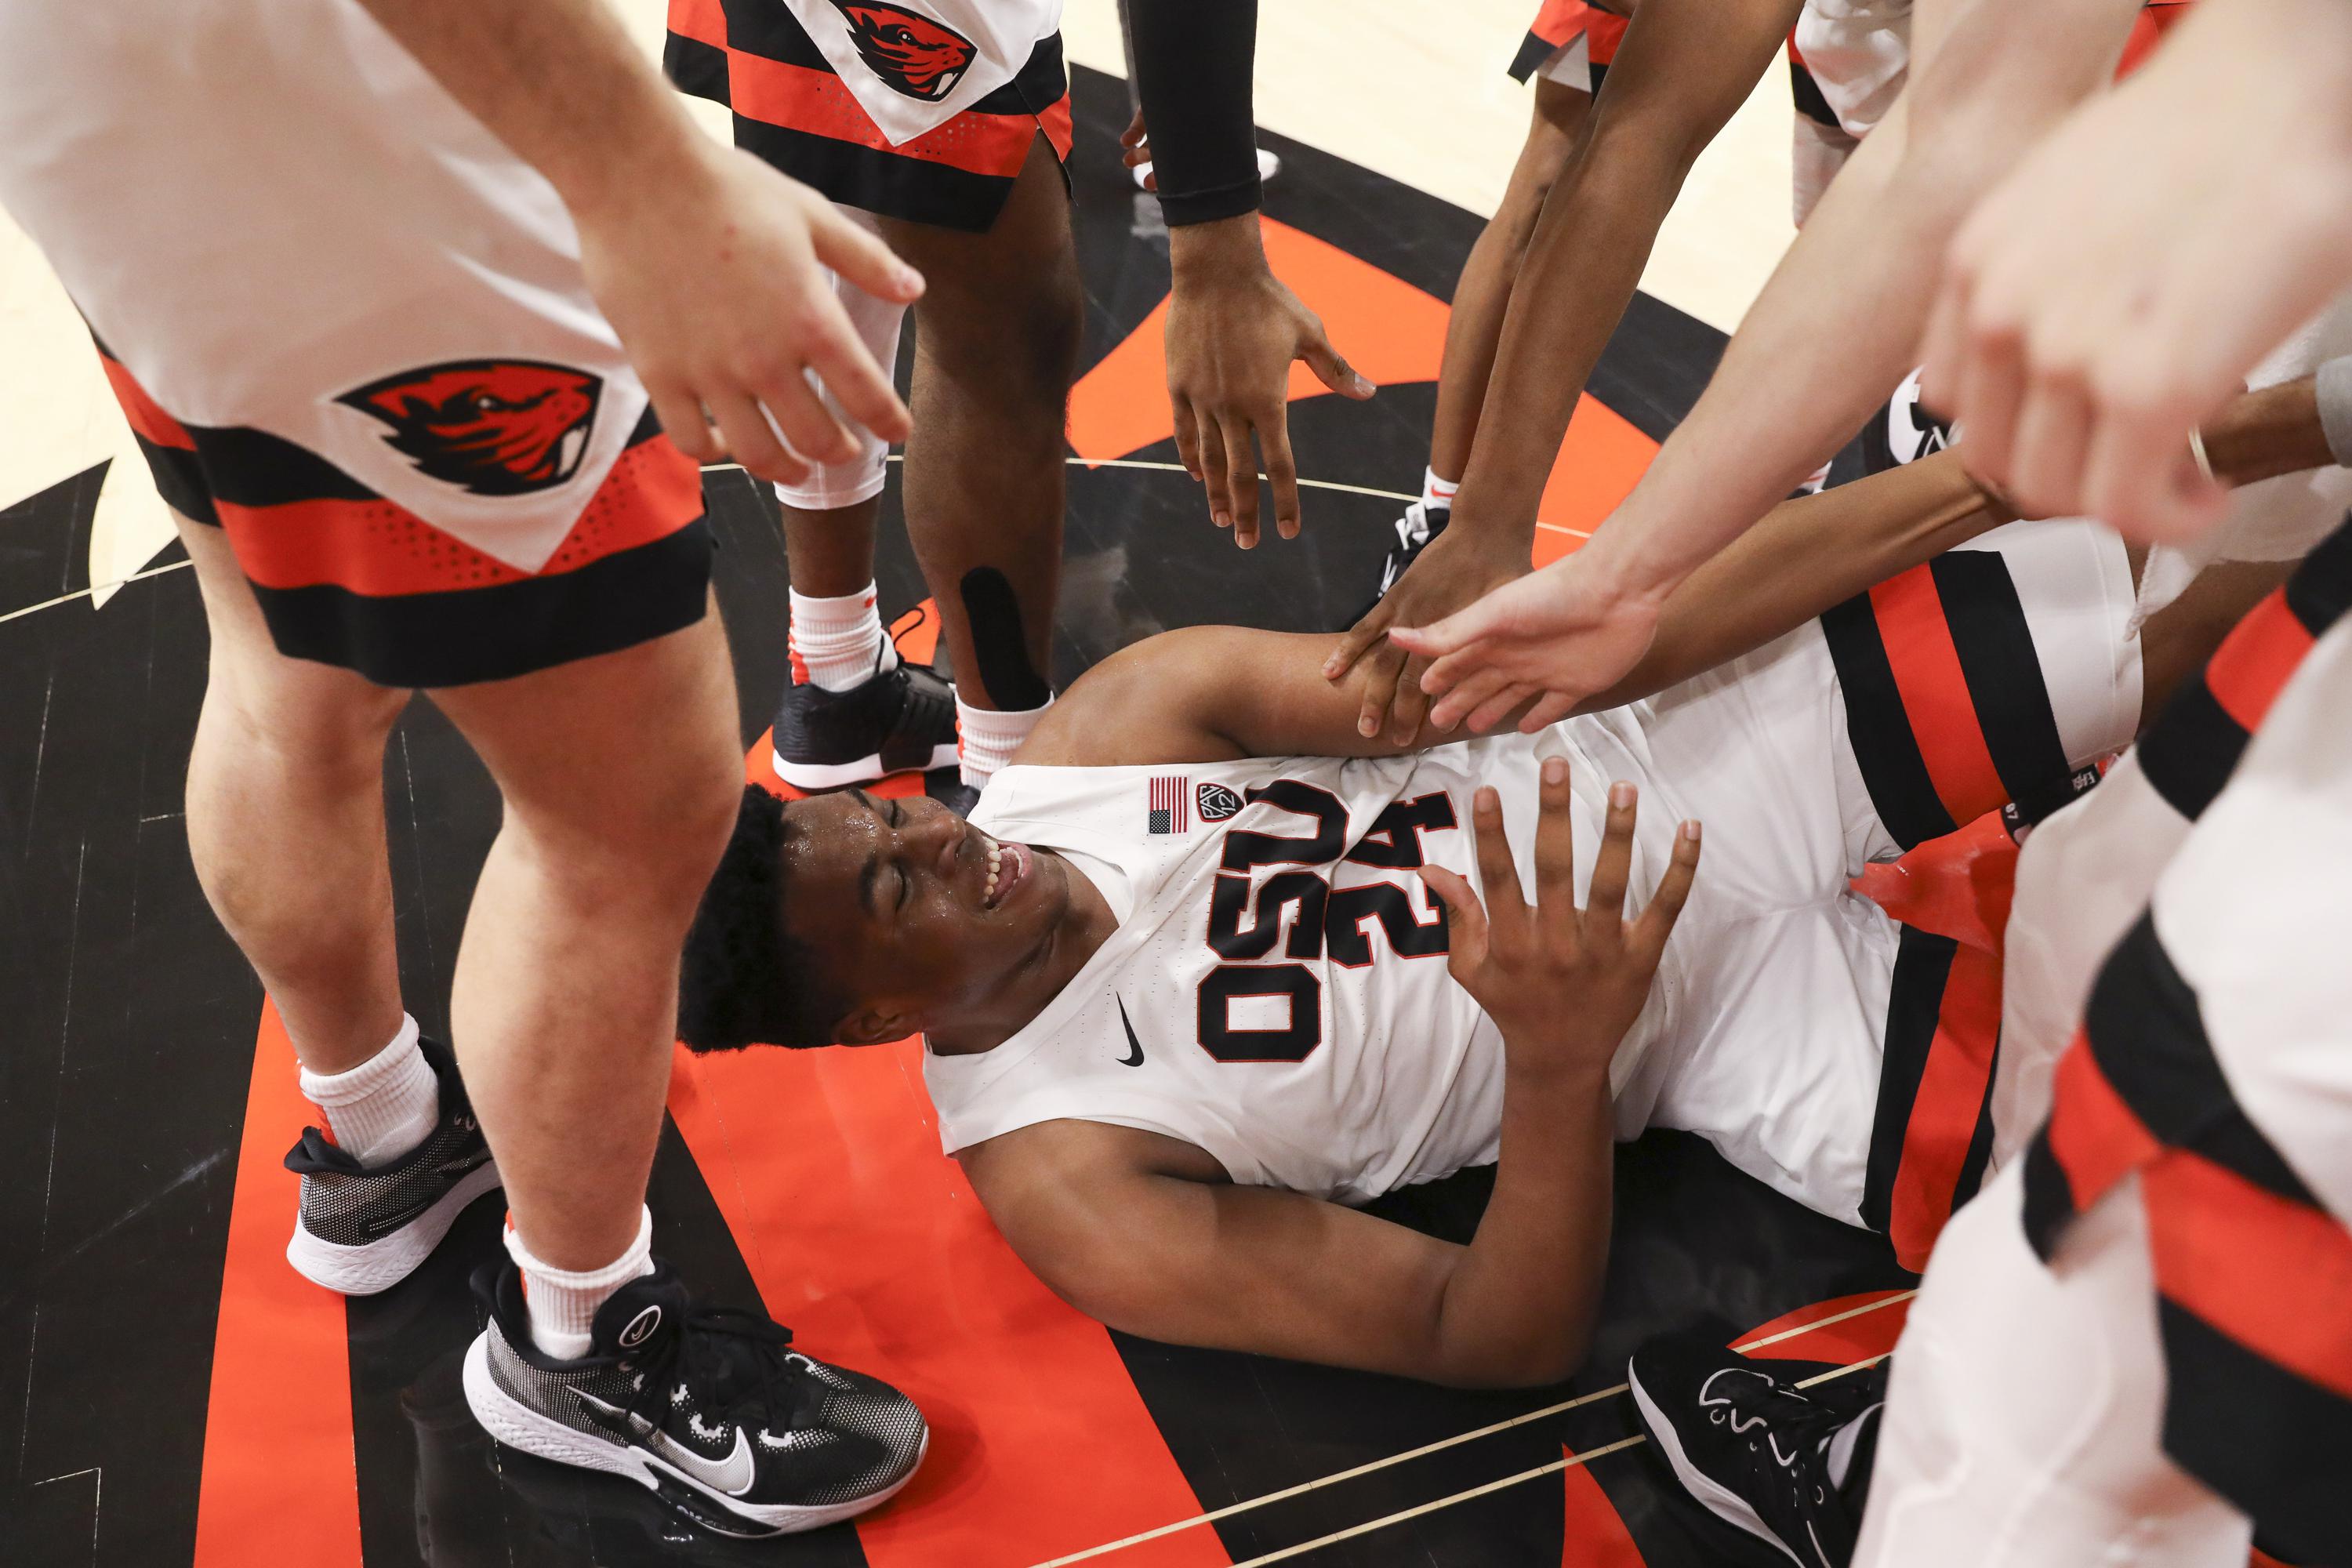 Pope sparks Oregon State to 60-52 victory over Colorado